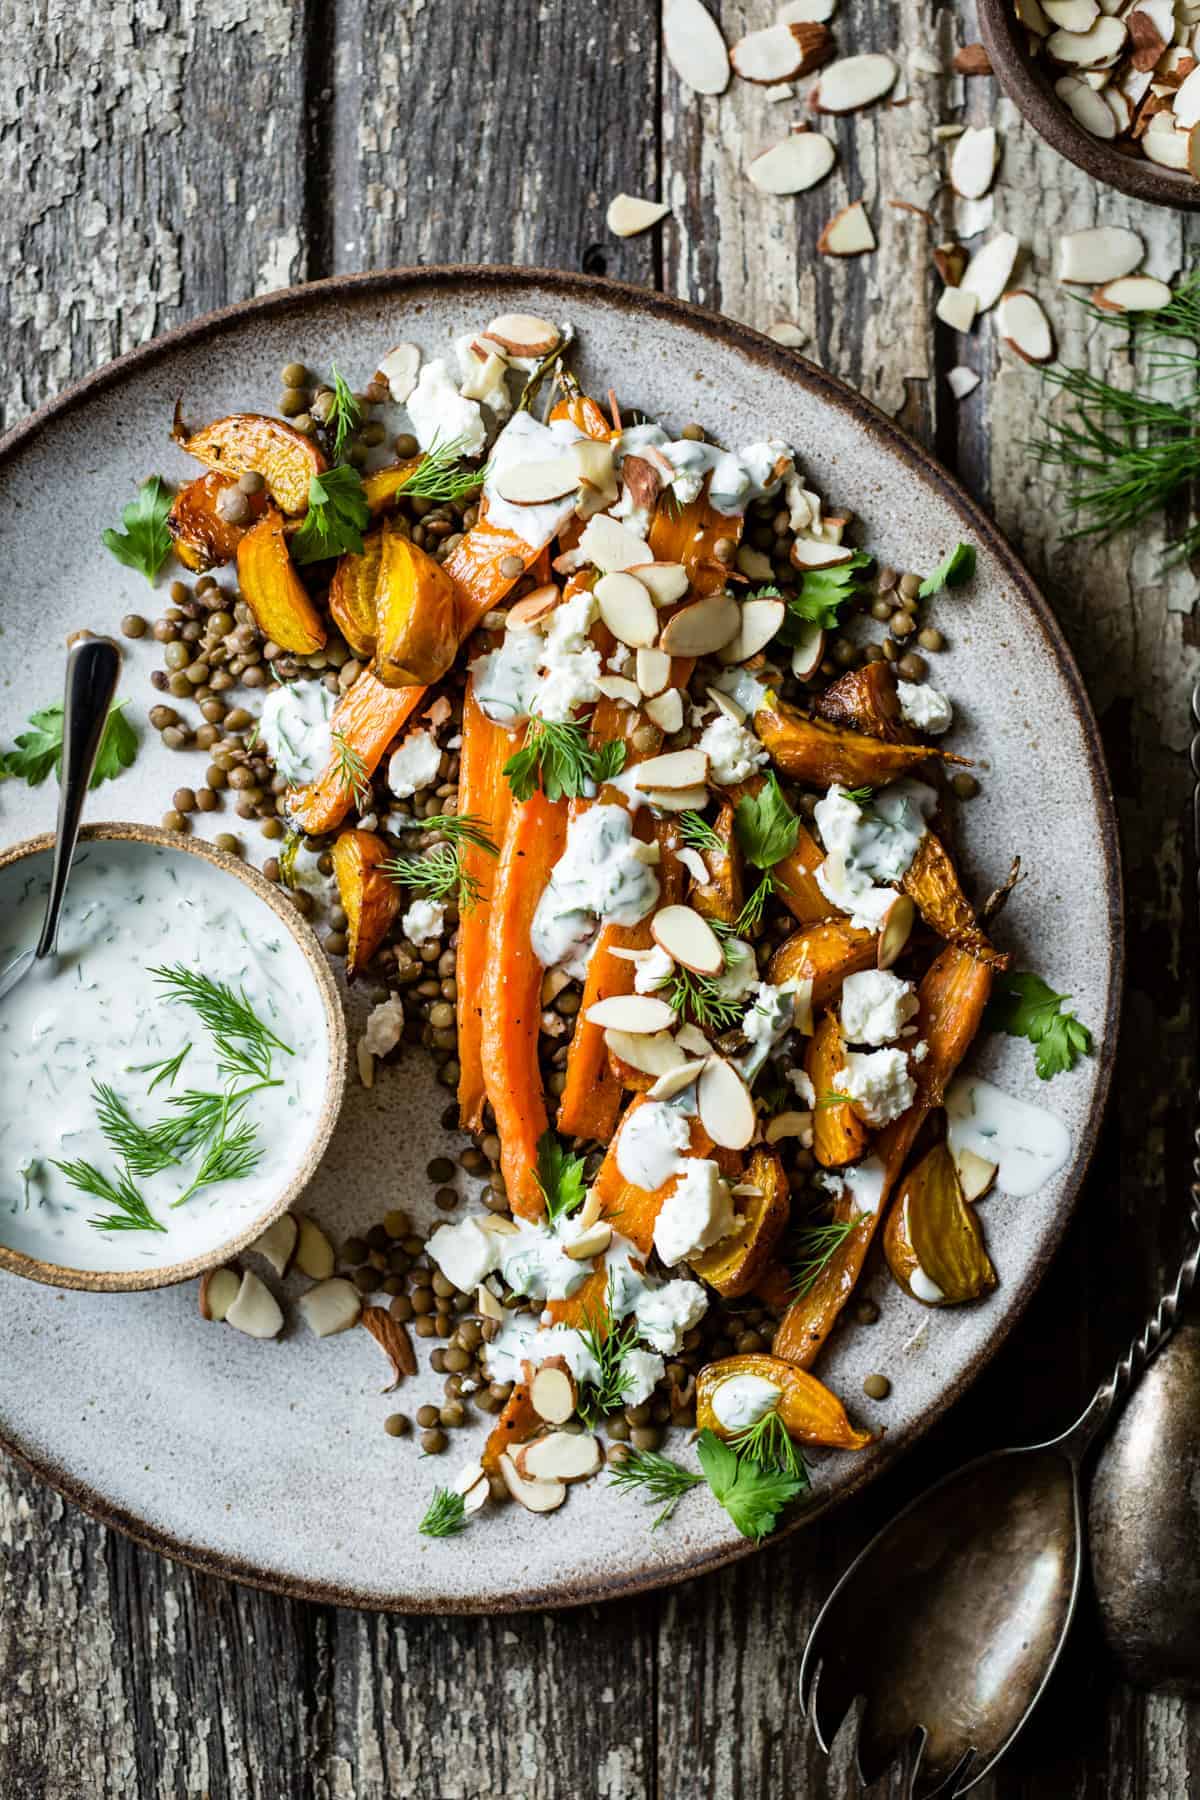 delicious Roasted Beet & Carrot Lentil Salad with Feta, Yogurt & Dill